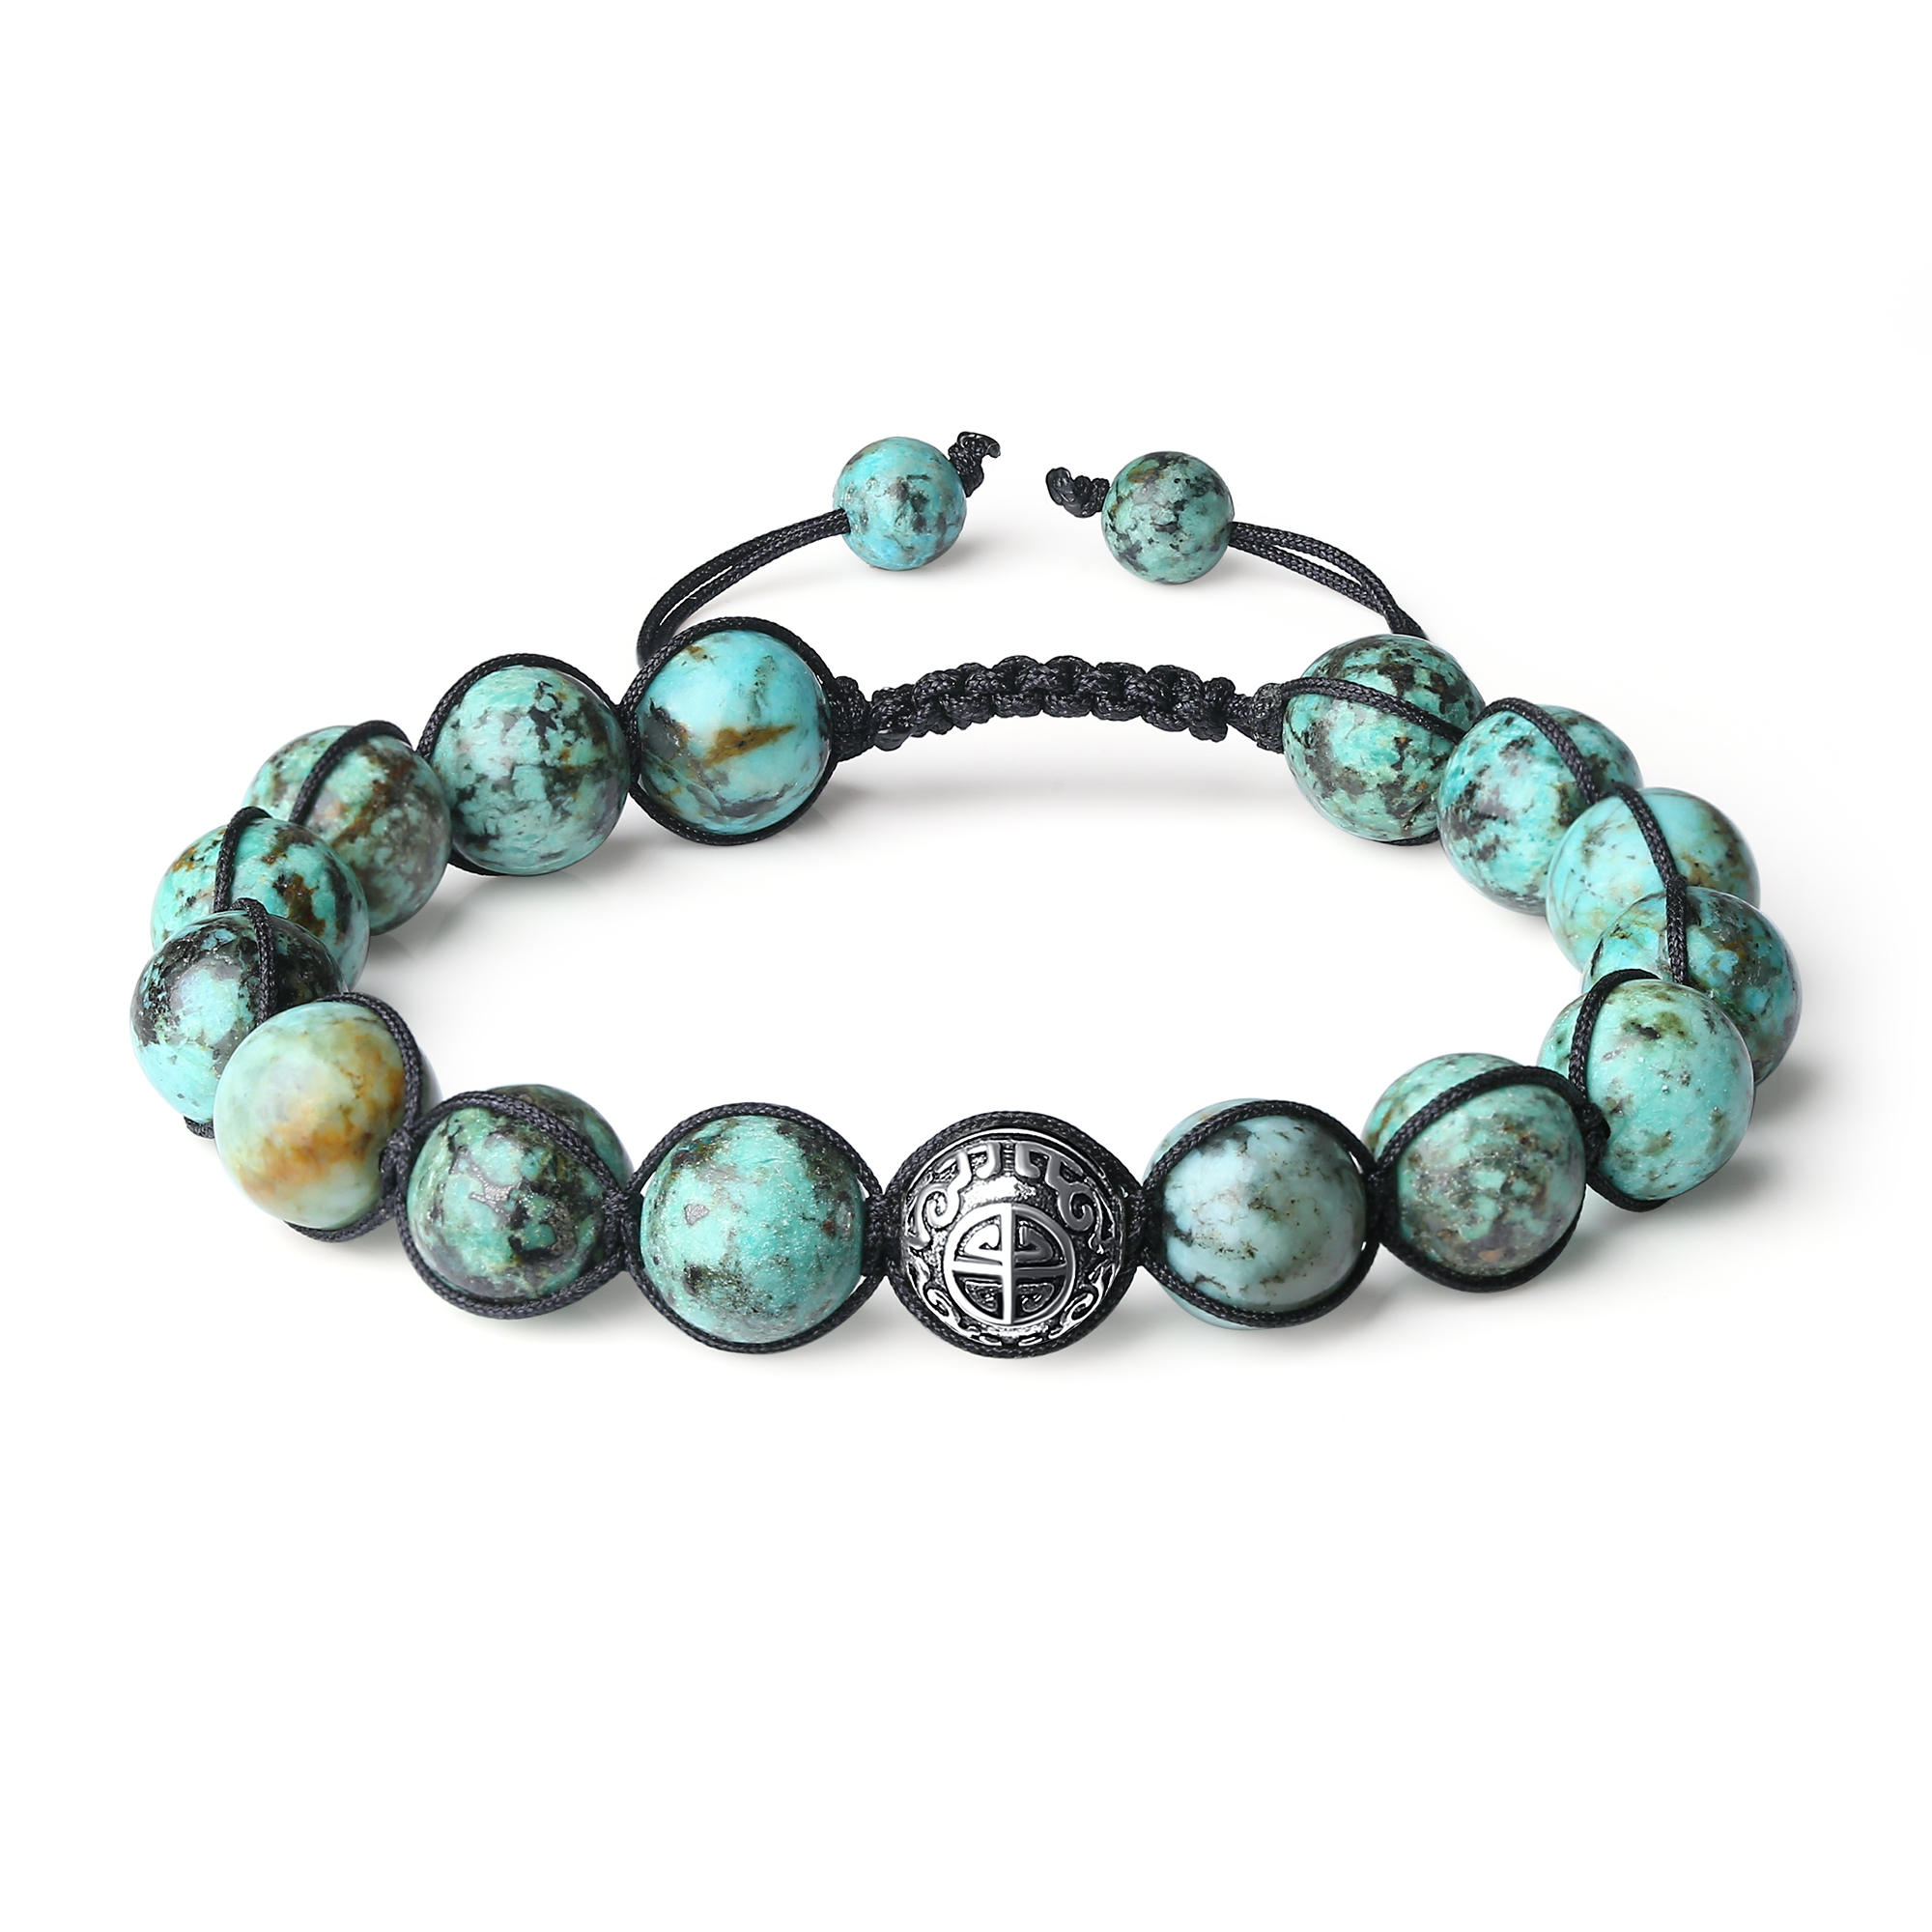 Amazon.com: Healing Bracelets for Women - African Turquoise Bracelet -  Healing Prayers Crystal Bracelet, 8mm Natural Stone Anti Anxiety Stress  Relief Yoga Beads Get Well Soon Gifts : Handmade Products